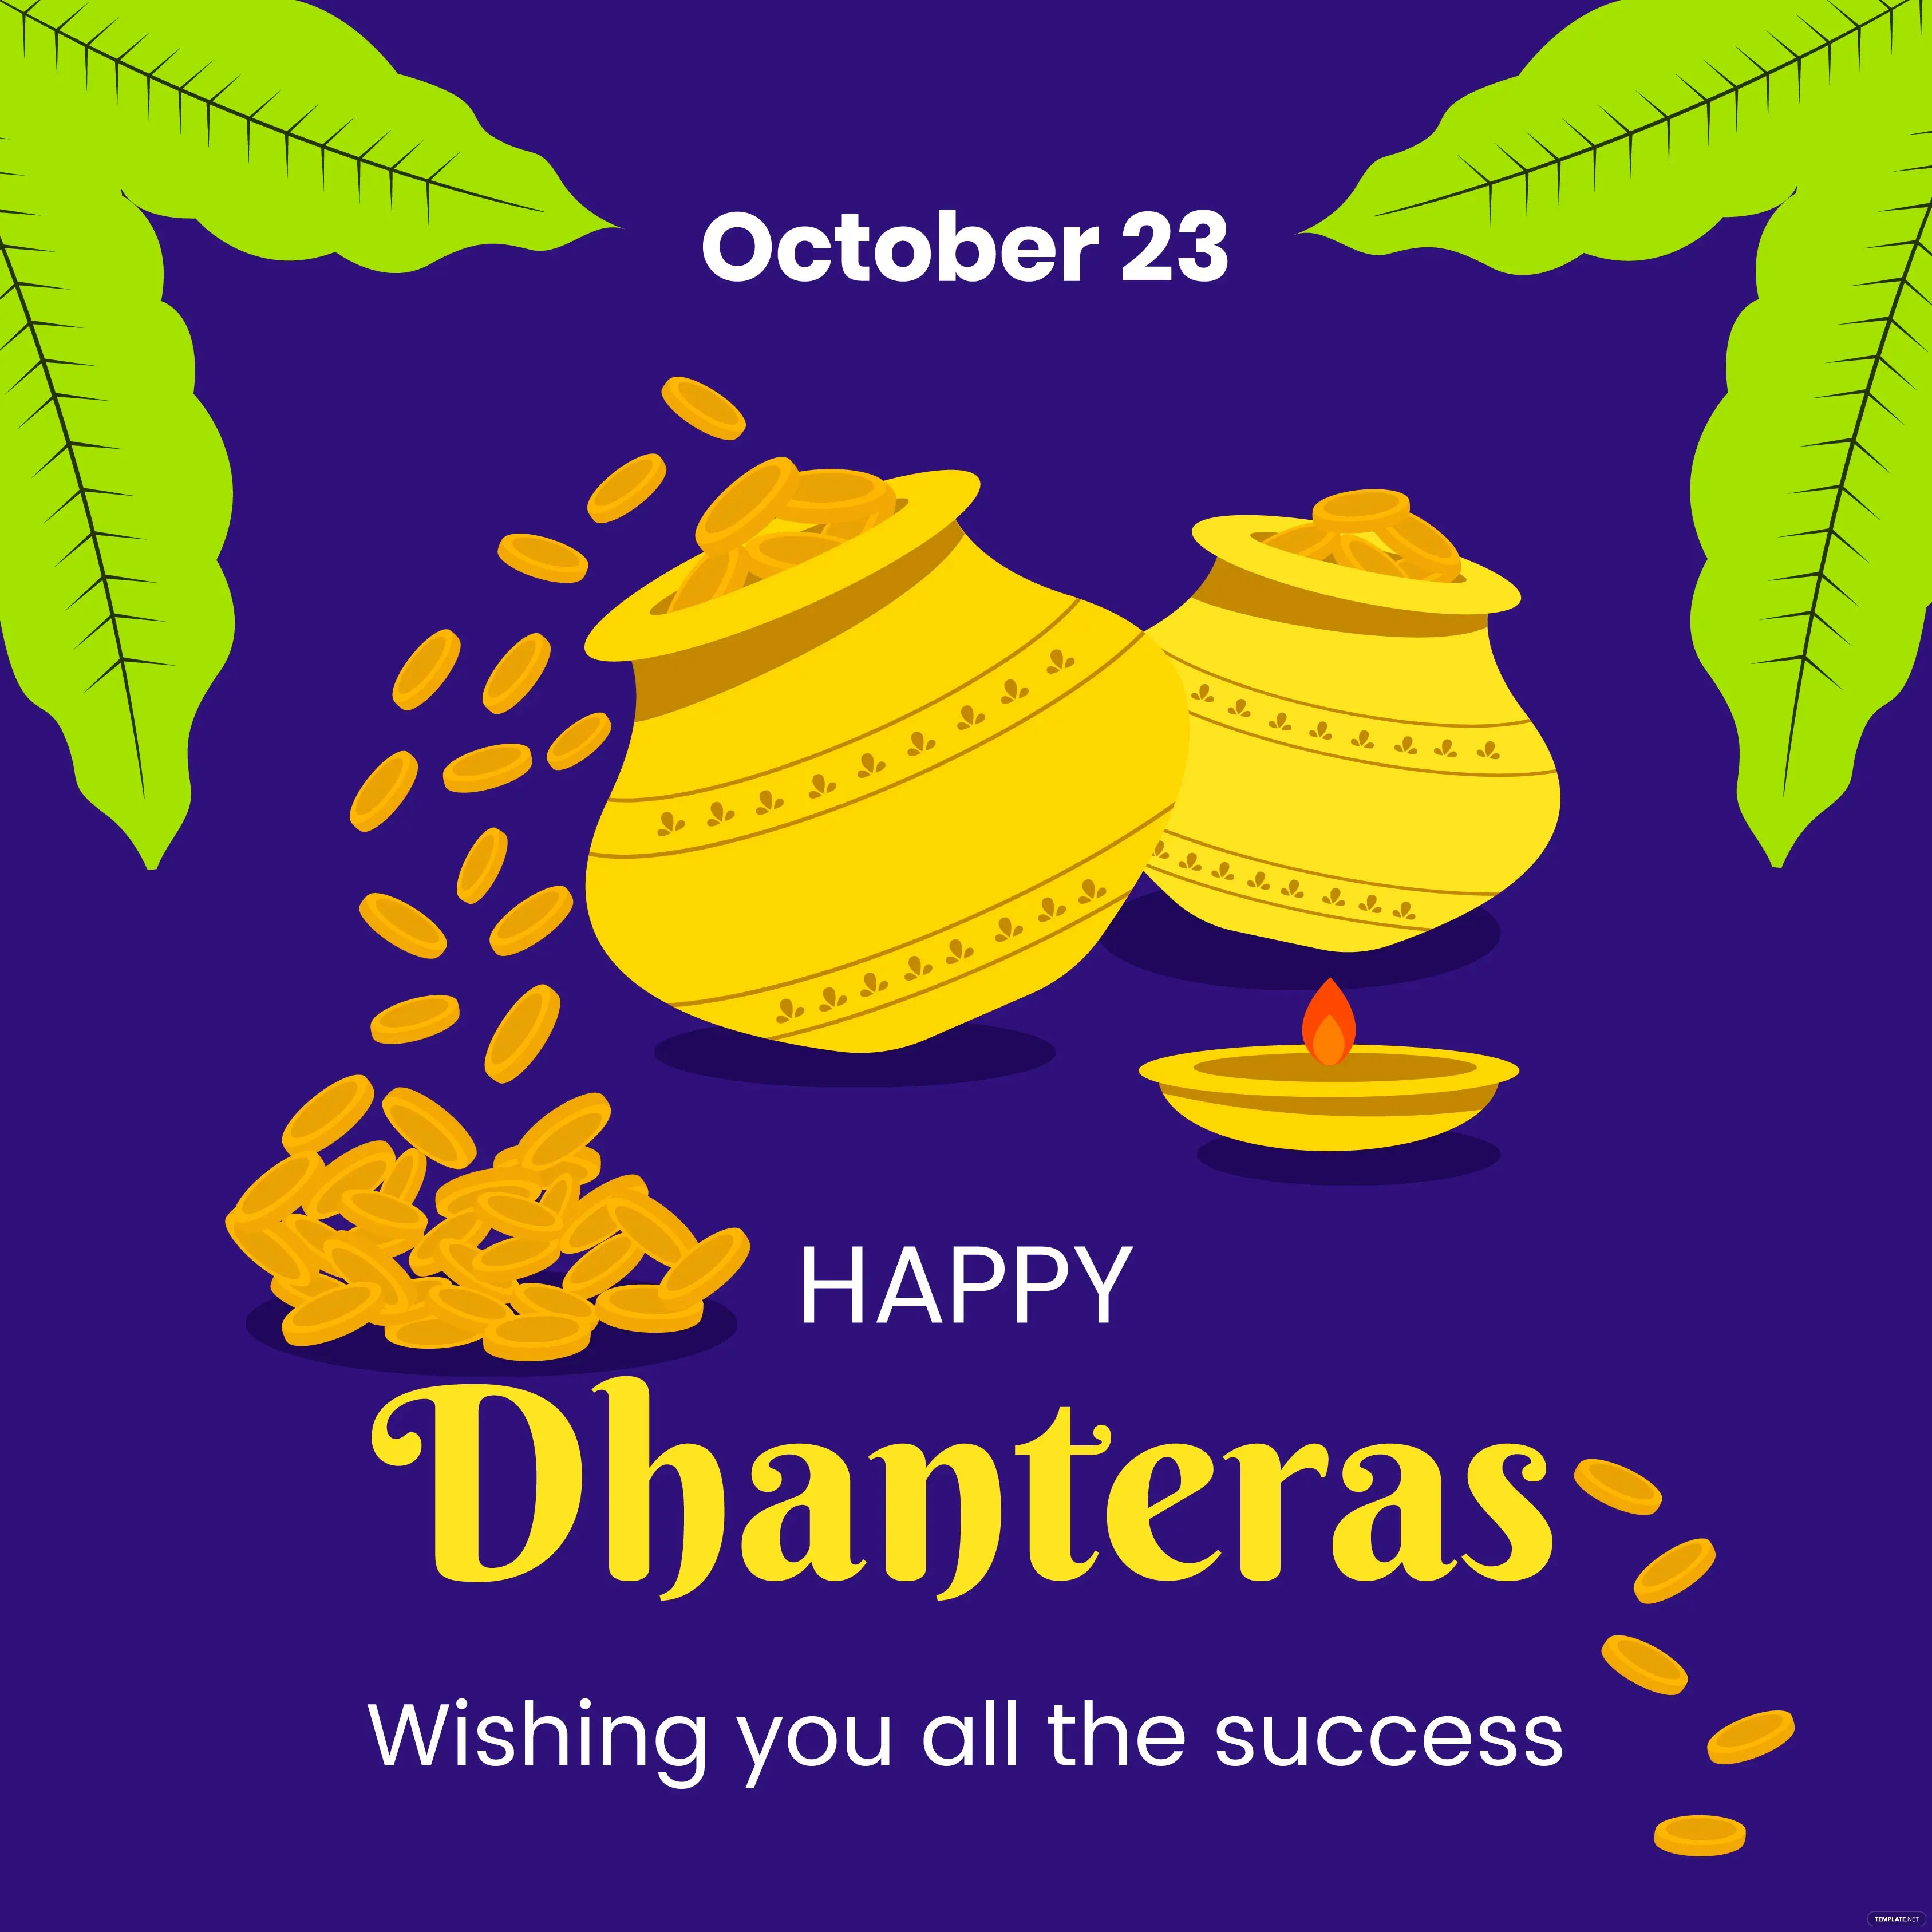 dhanteras facebook post ideas and examples